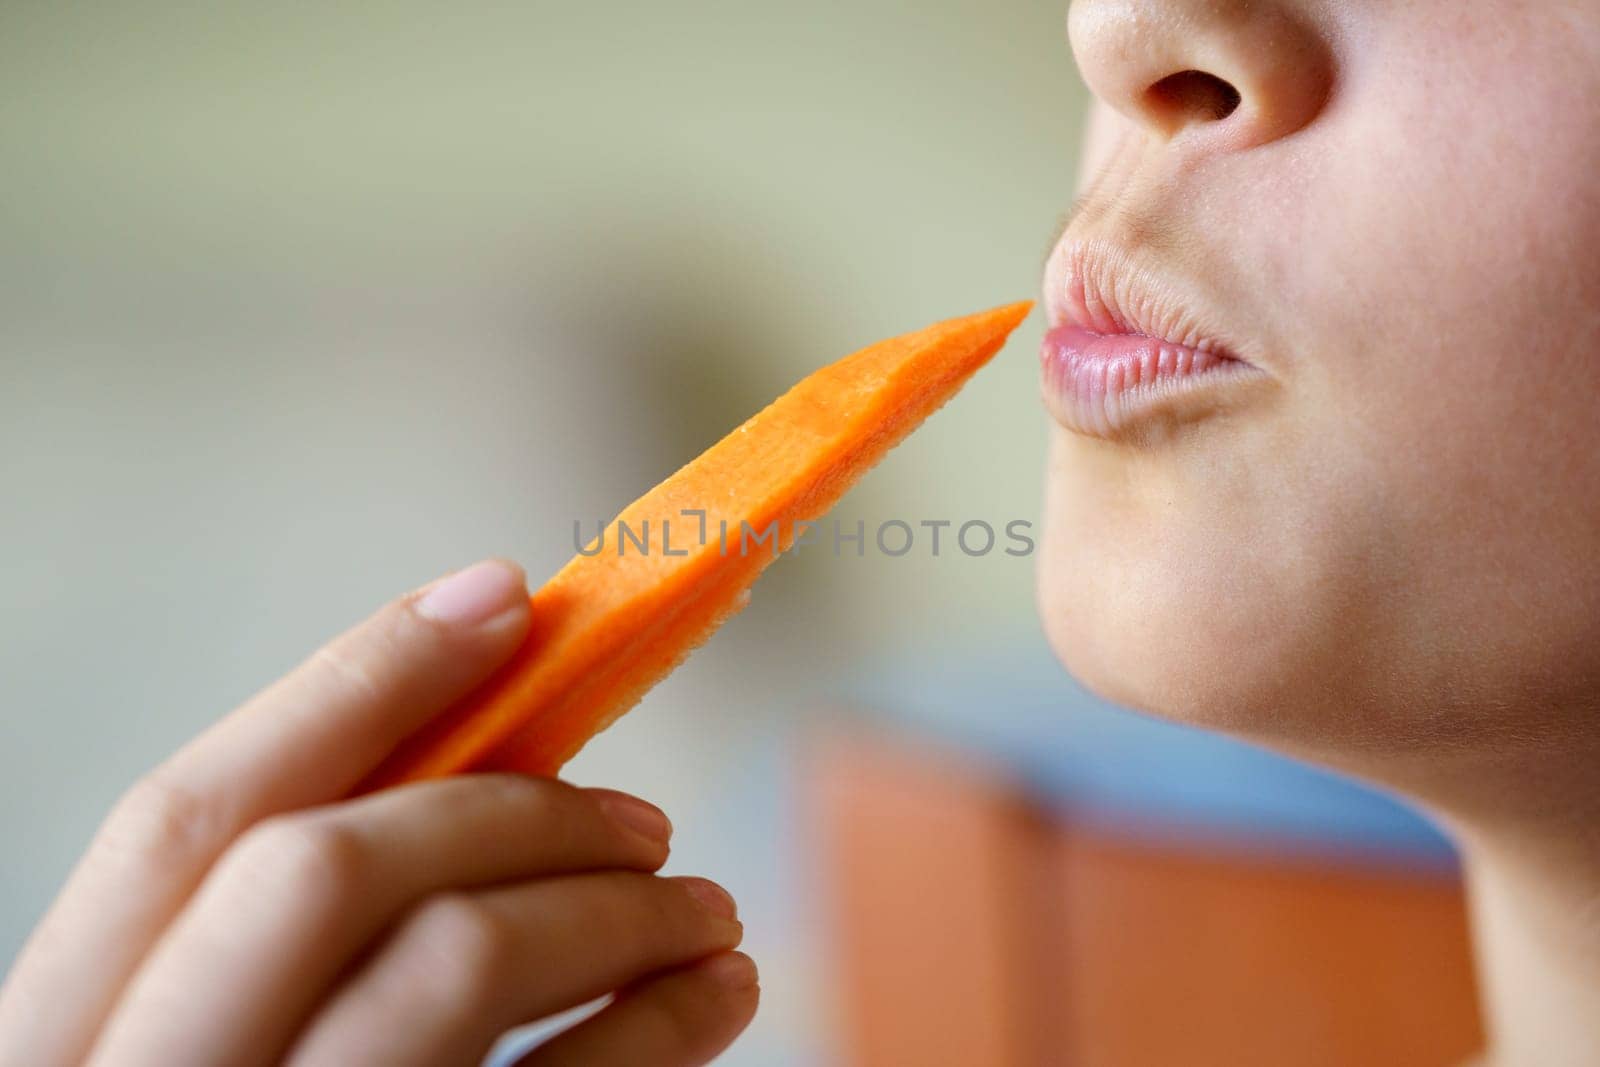 Anonymous girl puckering lips while holding fresh carrot slice by javiindy